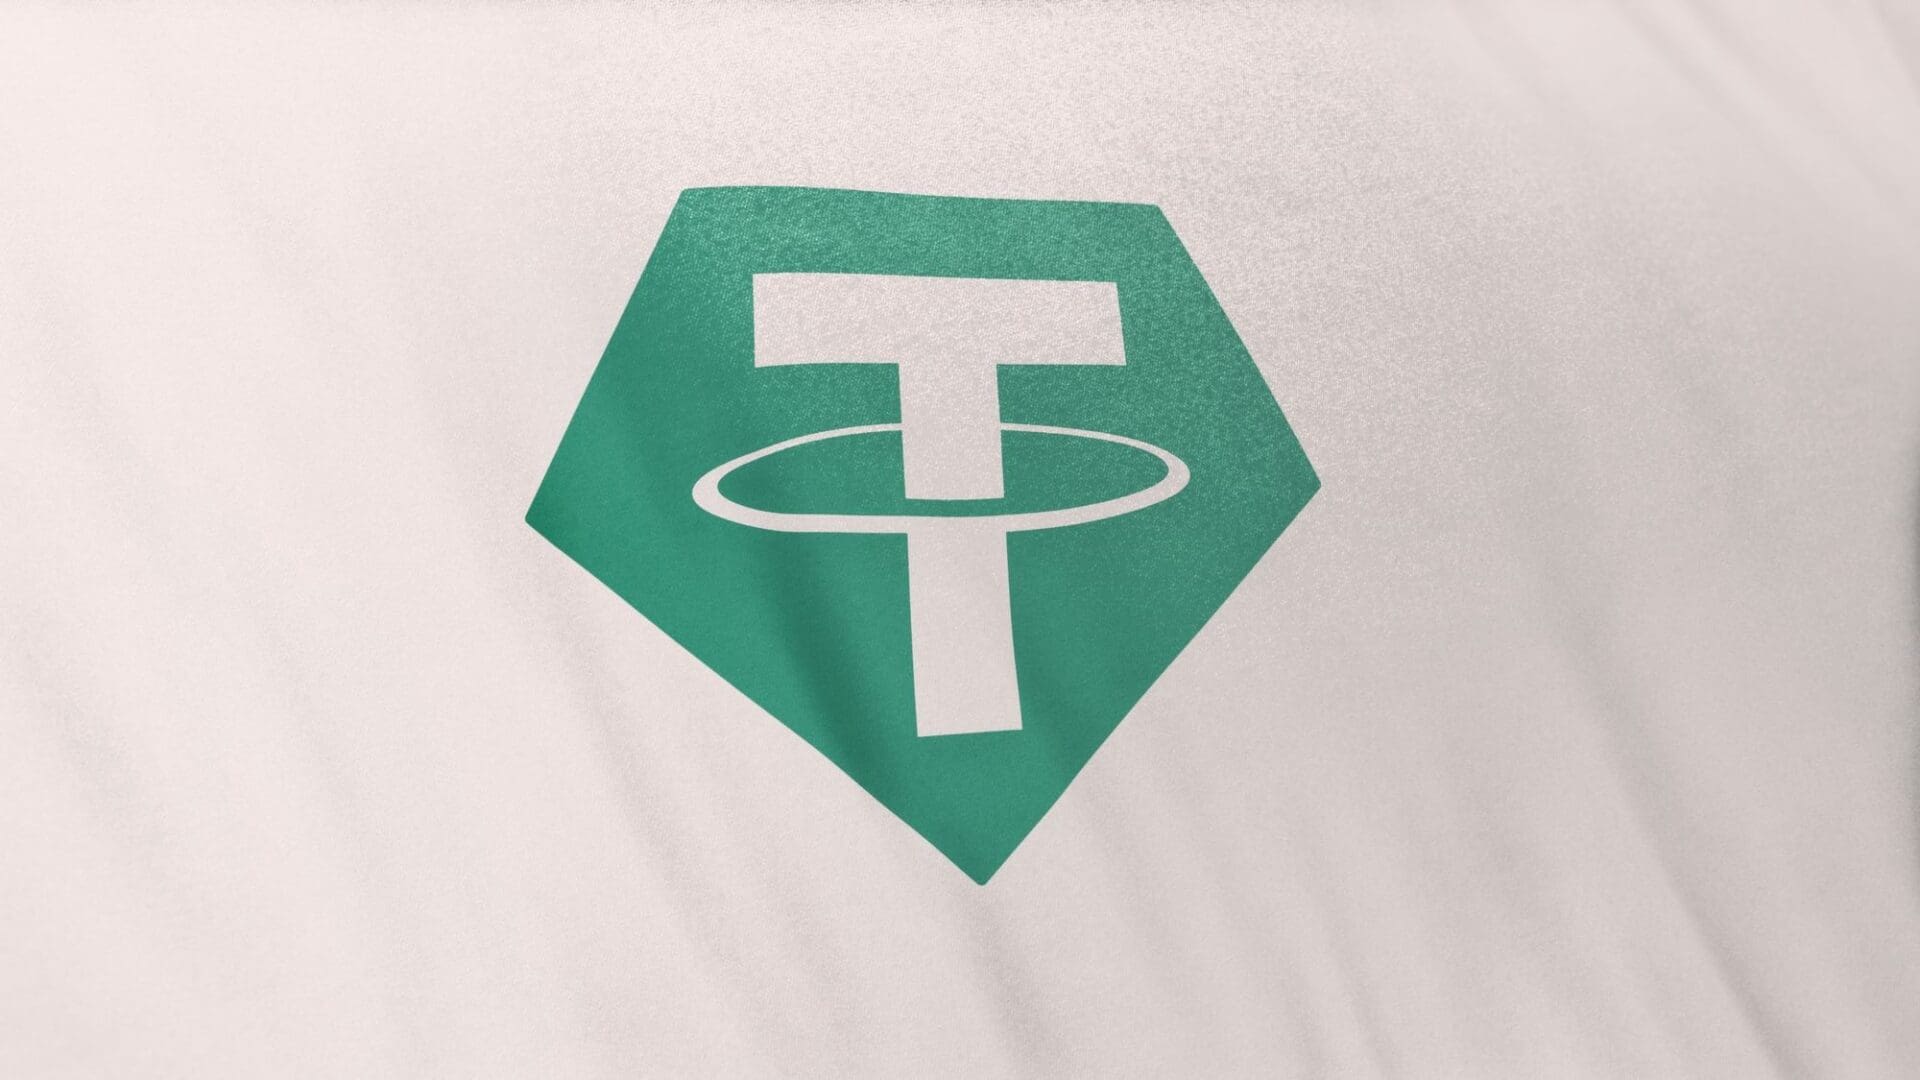 Tether (USDT) registra nuovi record tra le stablecoin